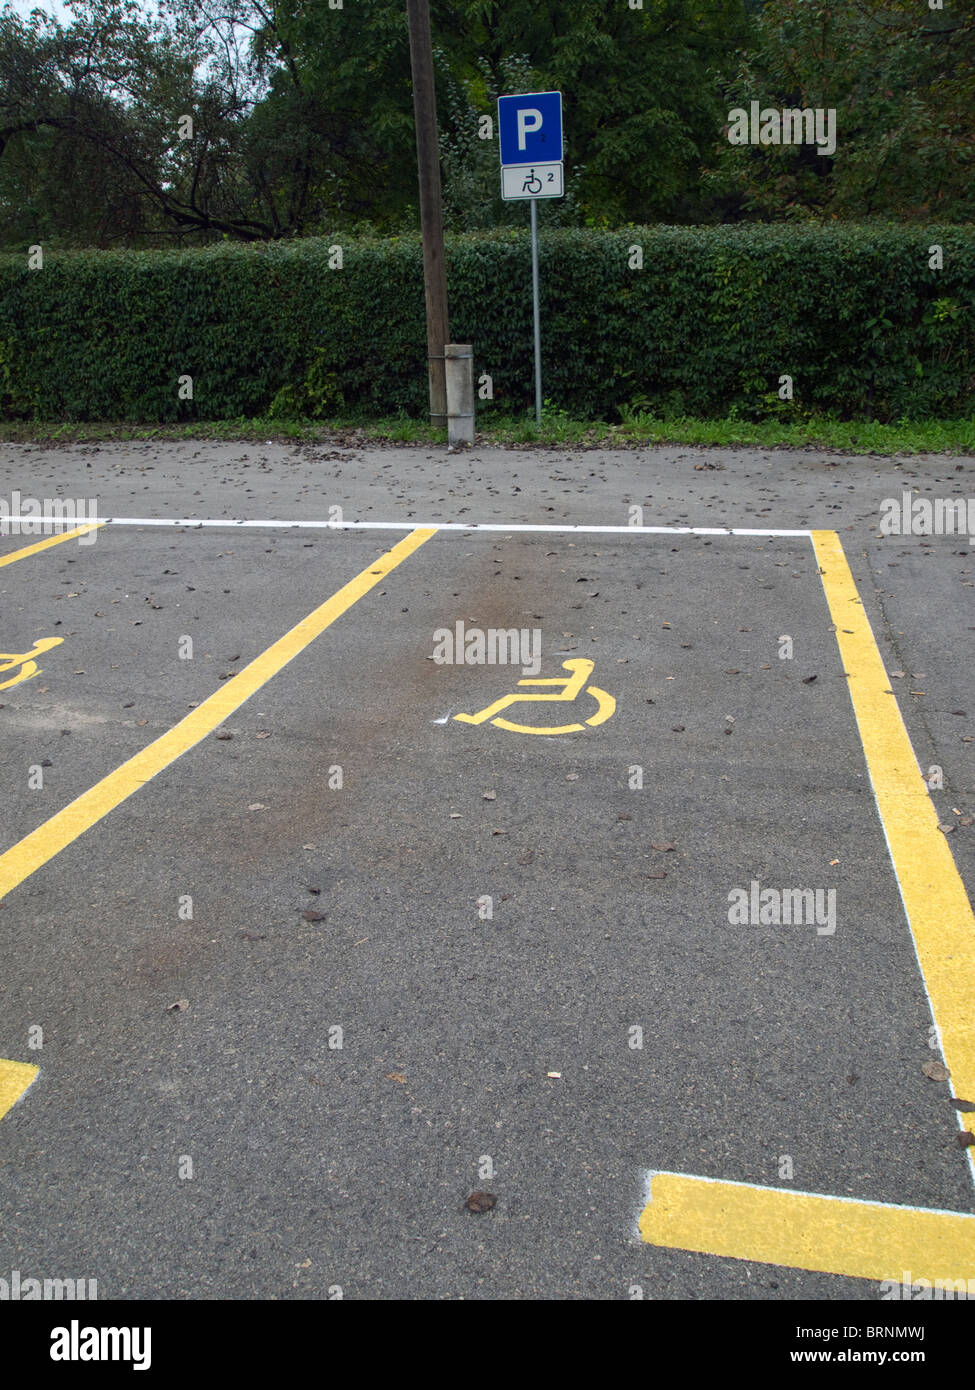 Invalid parking place Stock Photo